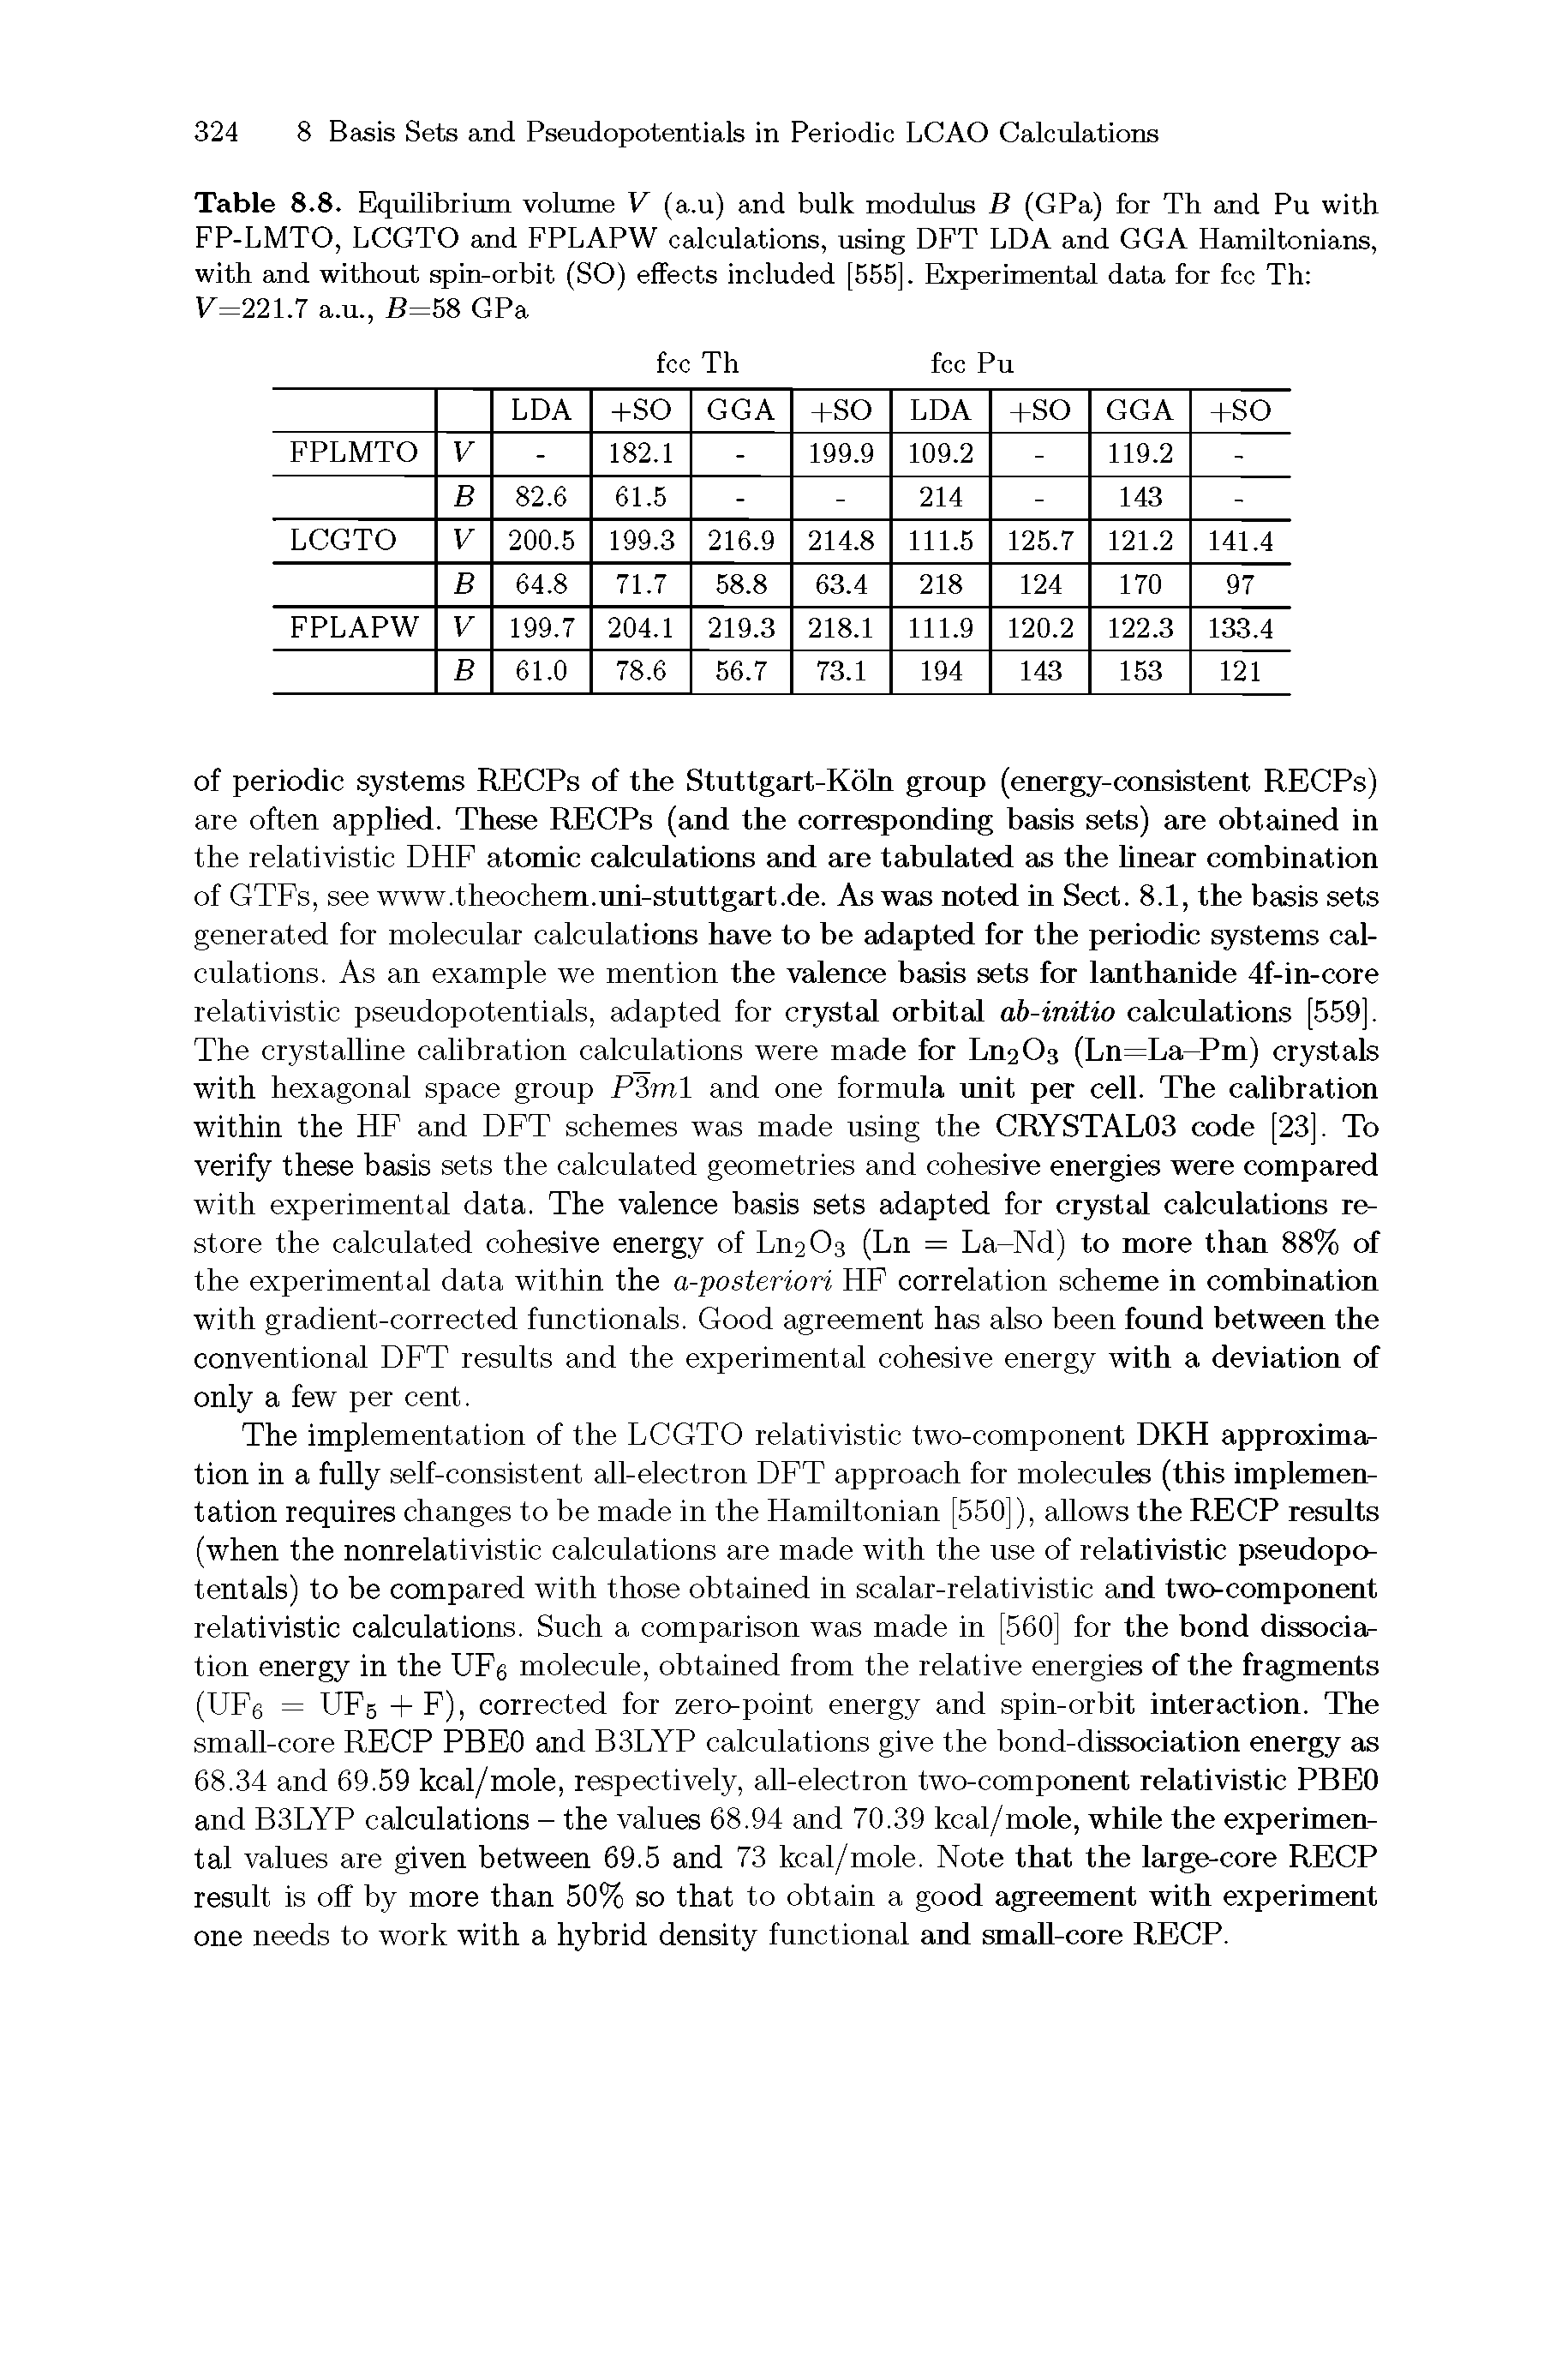 Table 8.8. Equilibrium volume V (a.u) and bulk modulus B (GPa) for Th and Pu with FP-LMTO, LCGTO and FPLAPW calculations, using DFT LDA and GGA Hamiltonians, with and without spin-orbit (SO) effects included [555]. Experimental data for fee Th V=221.7 a.u., B=58 GPa...